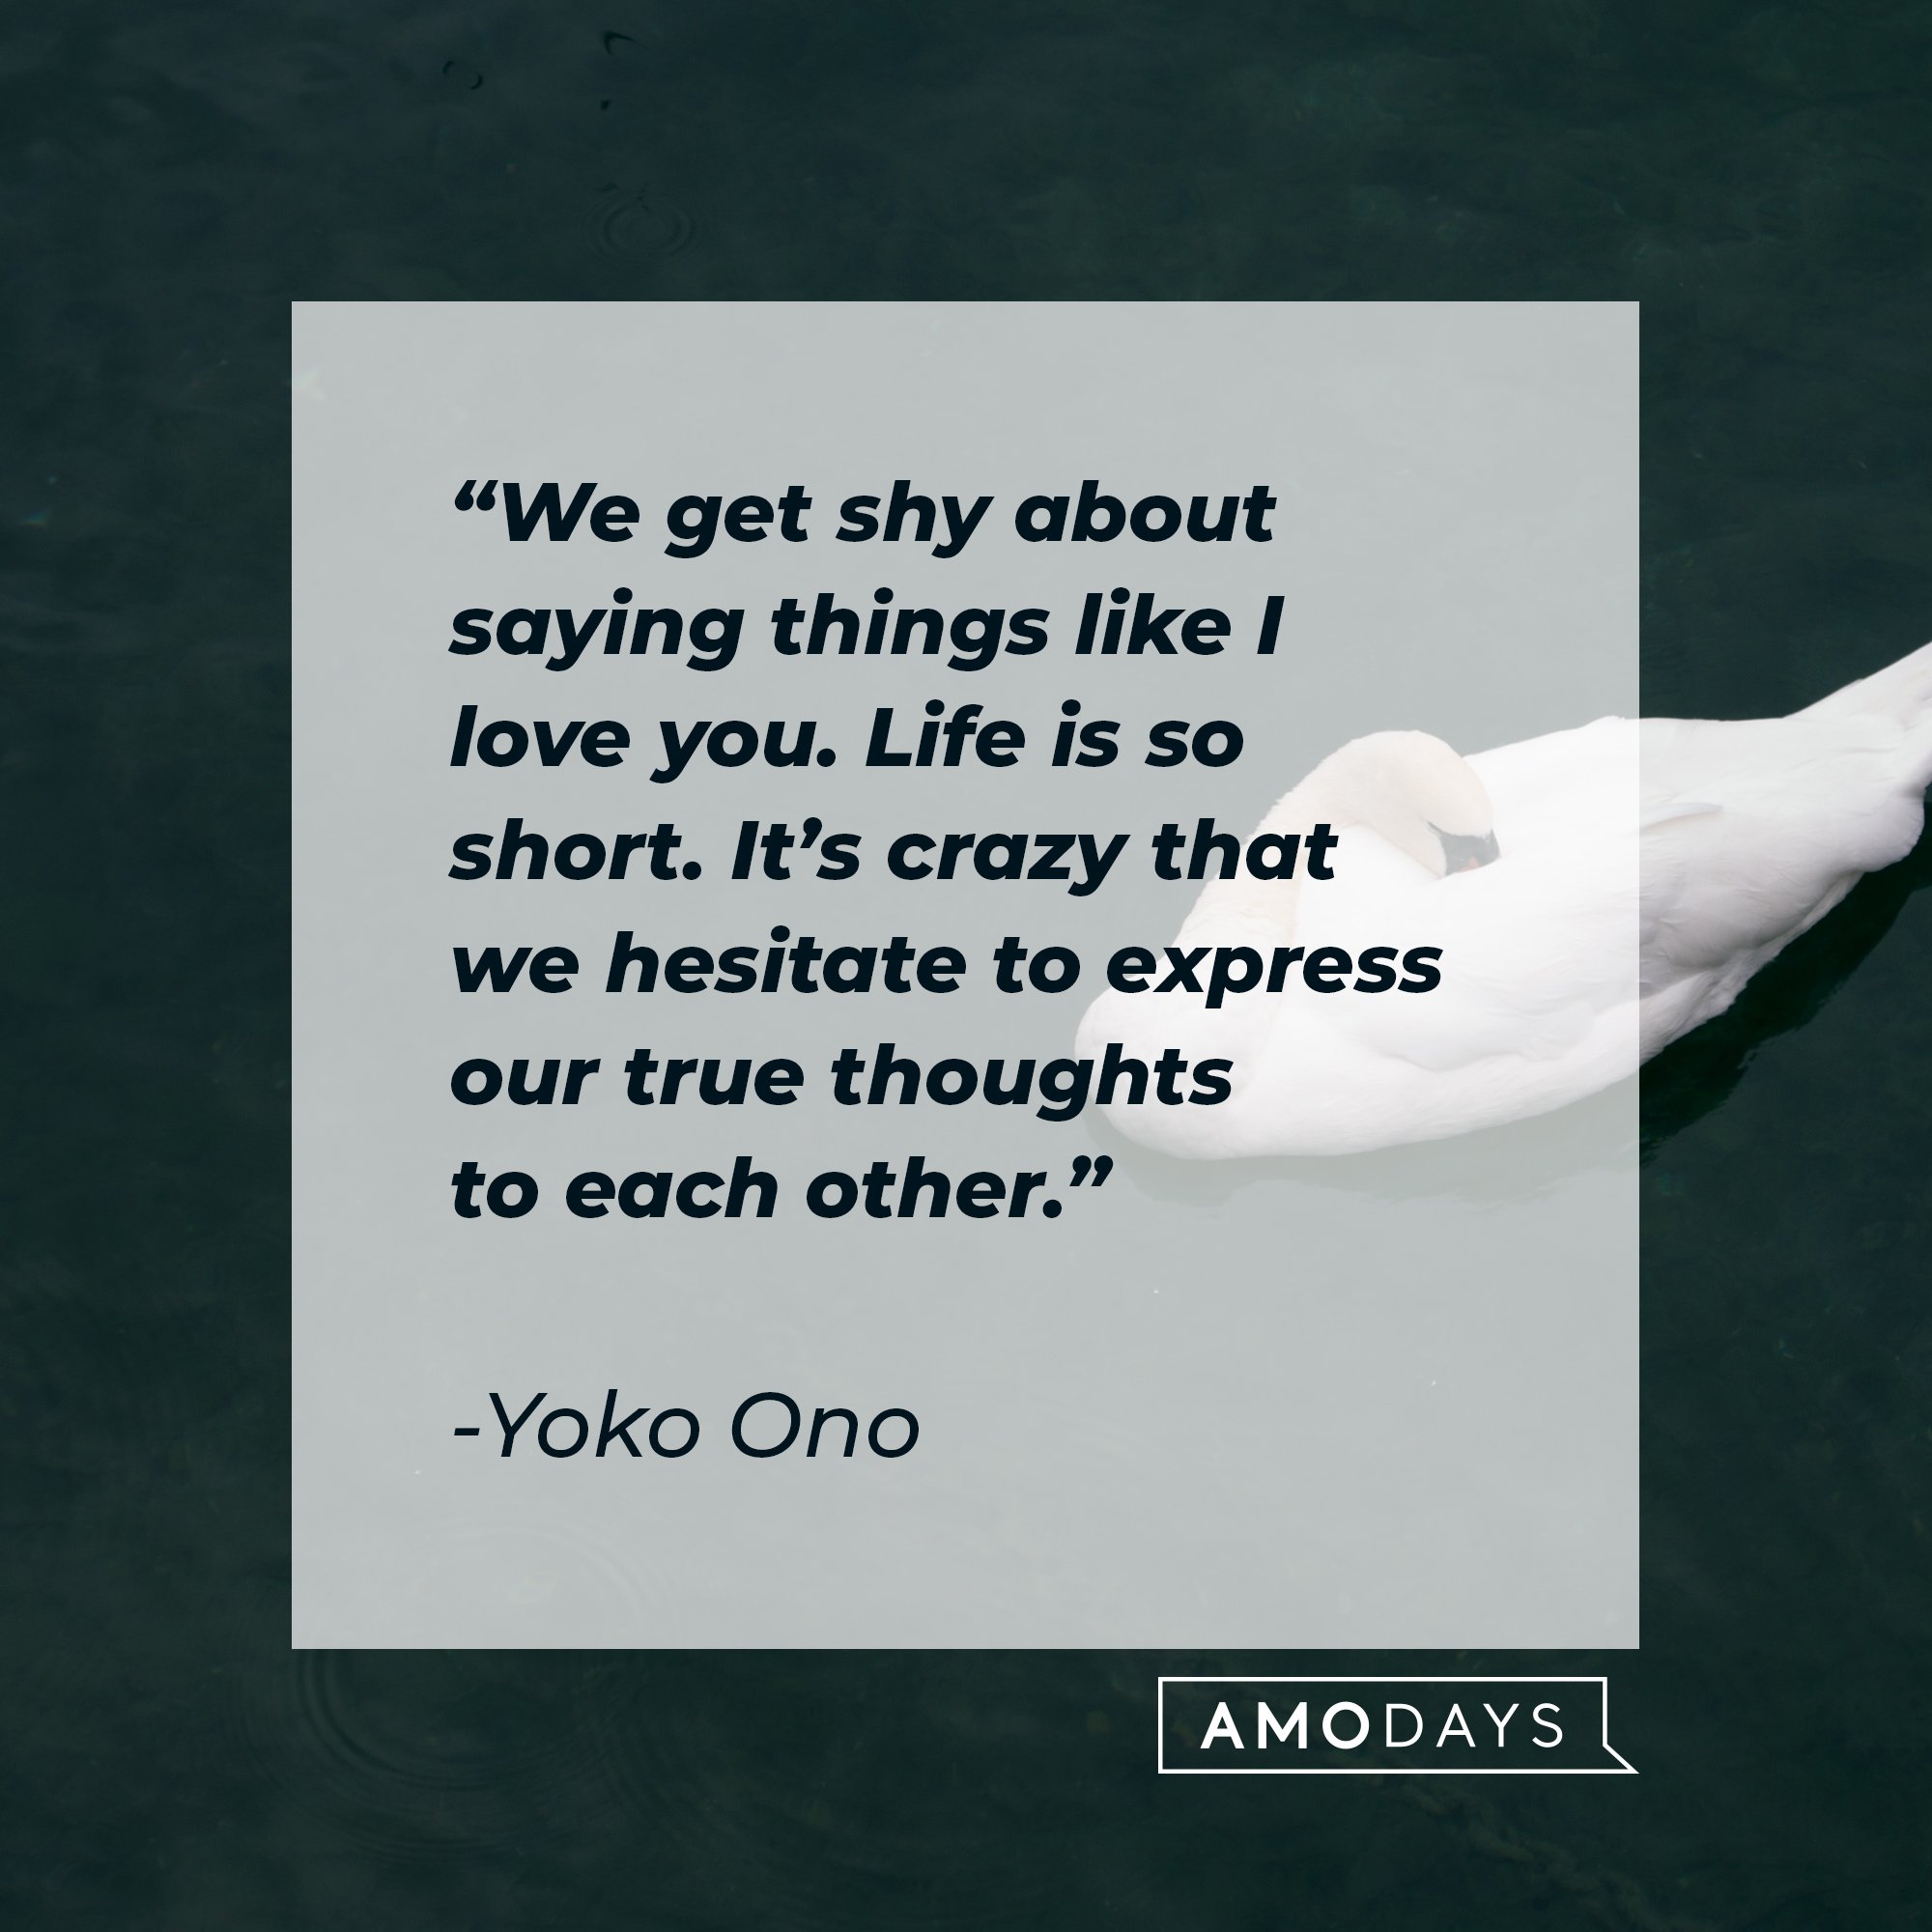 Yoko Ono's quote: “We get shy about saying things like I love you. Life is so short. It’s crazy that we hesitate to express our true thoughts to each other.” | Image: AmoDays